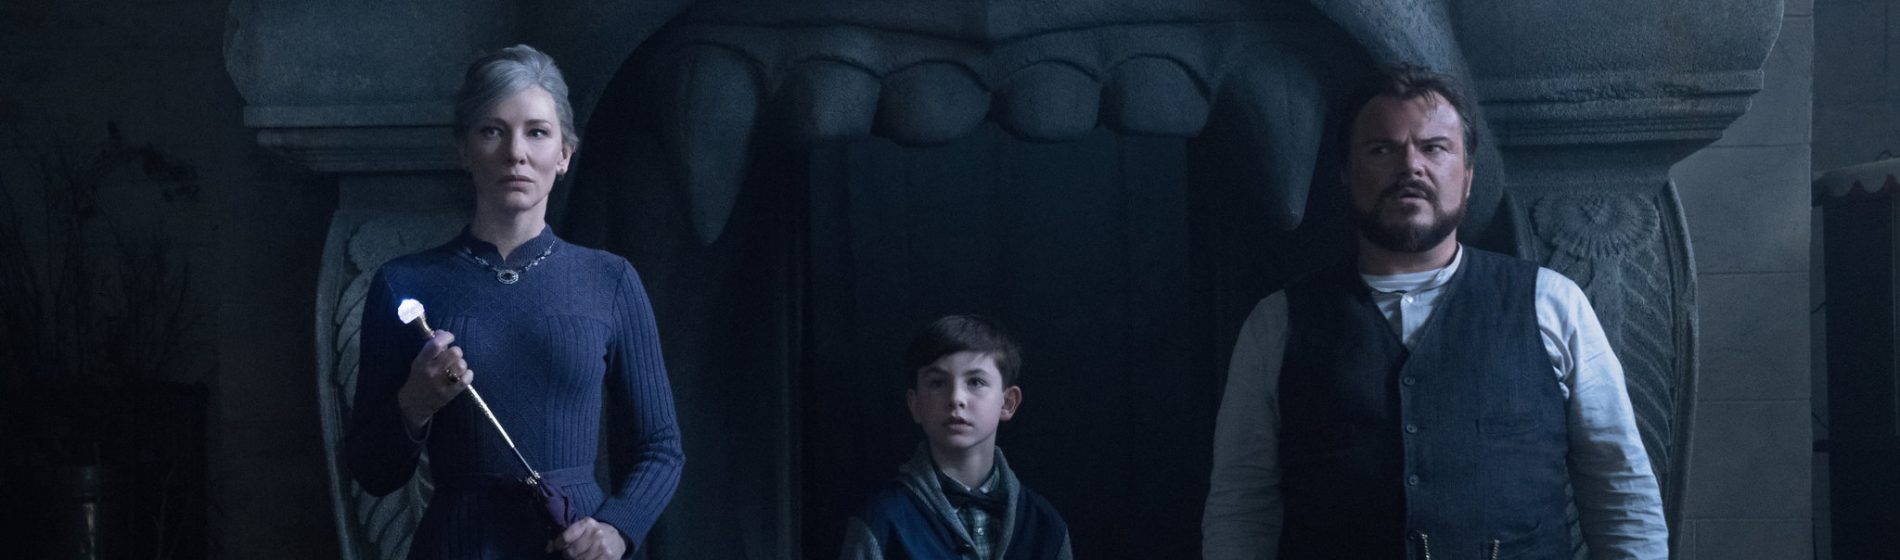 Cate Blanchett, Owen Vaccaro and Jack Black stand in front of a dark house